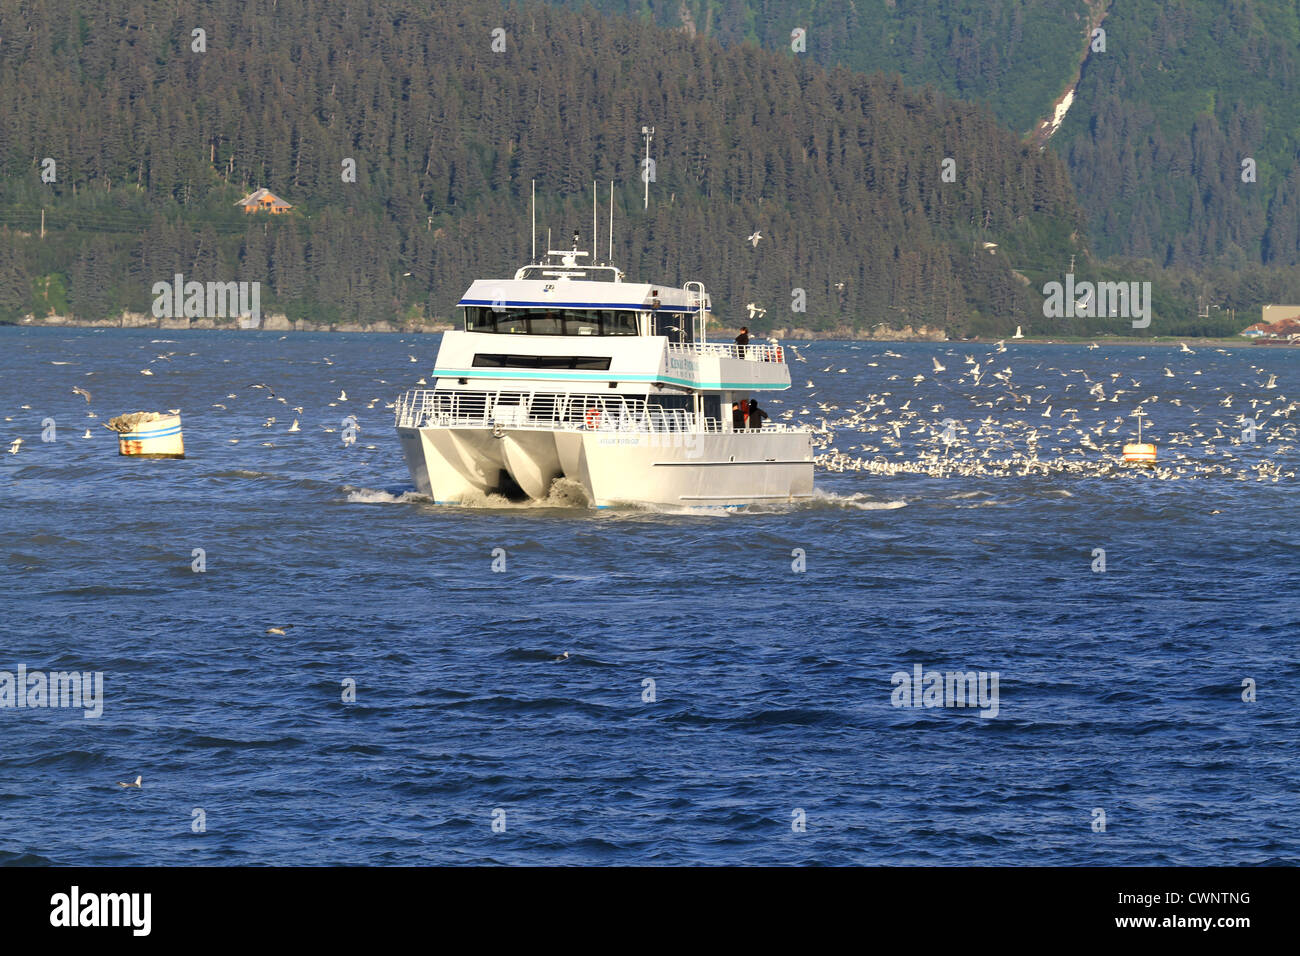 A Kenai Fjord Cruise boat travels through the water in the fjord while seagulls flock behind, with forested mountains. Stock Photo